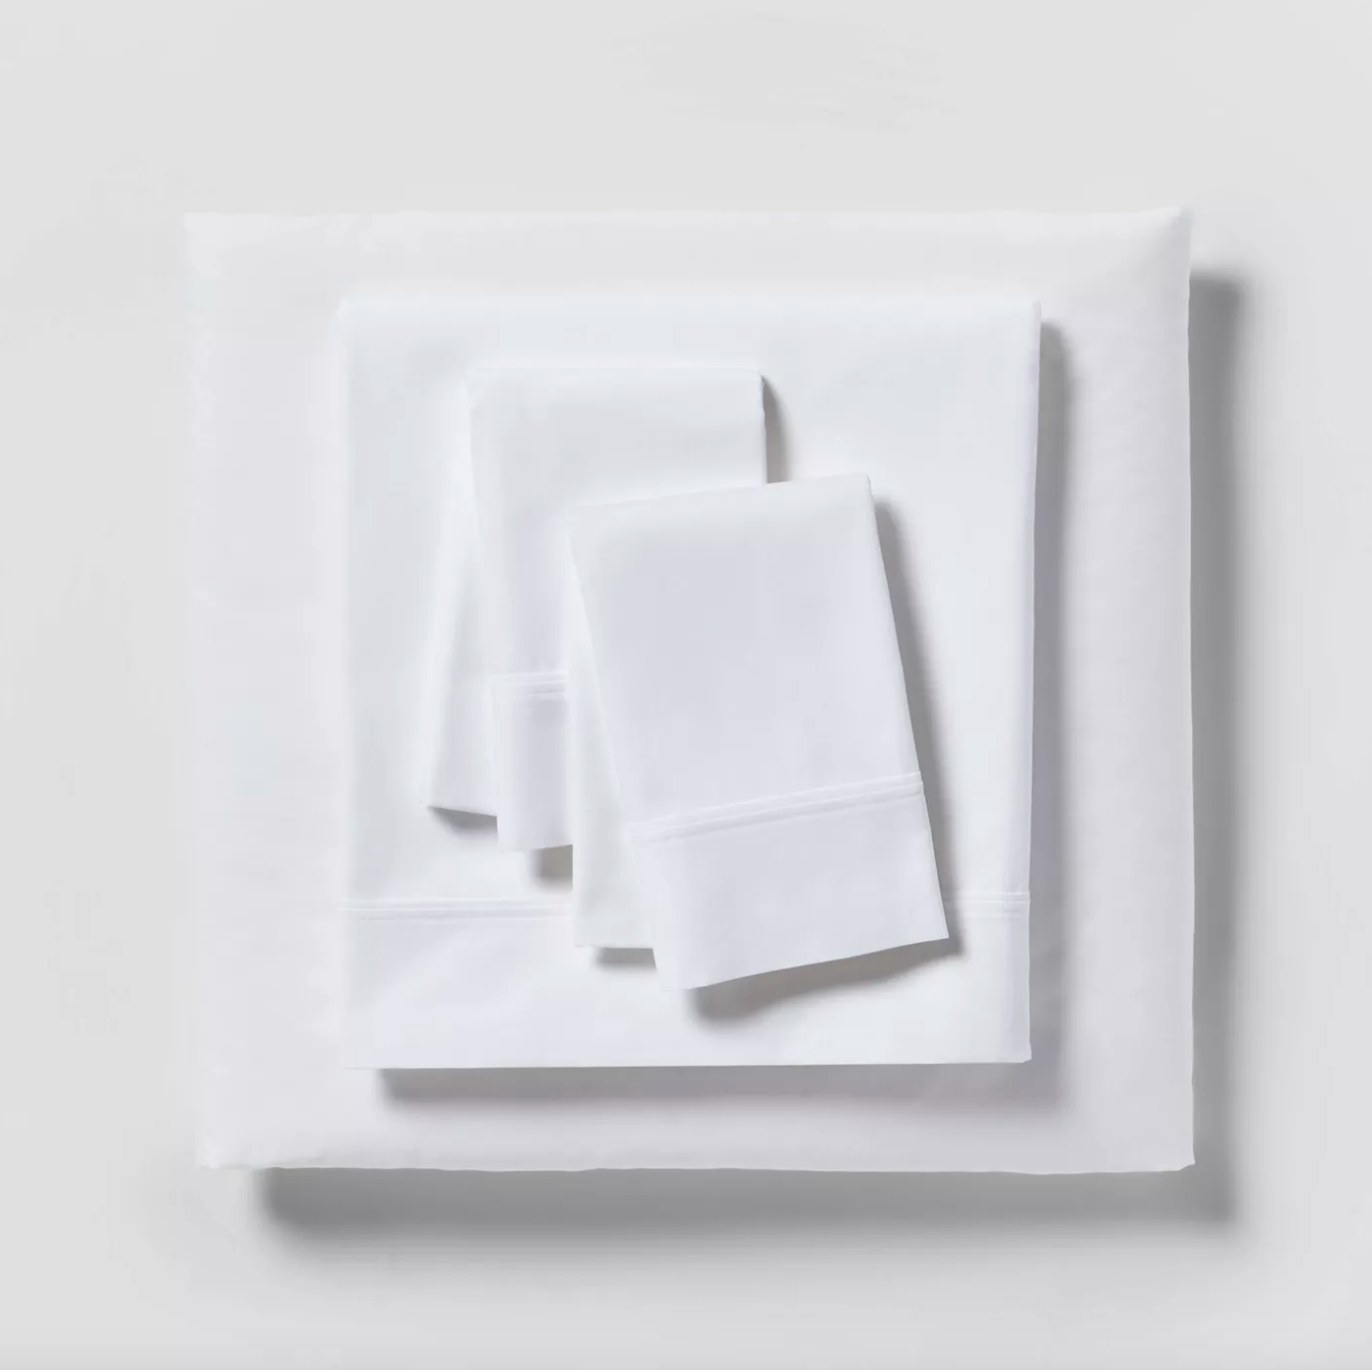 The 300-thread count sheets in white